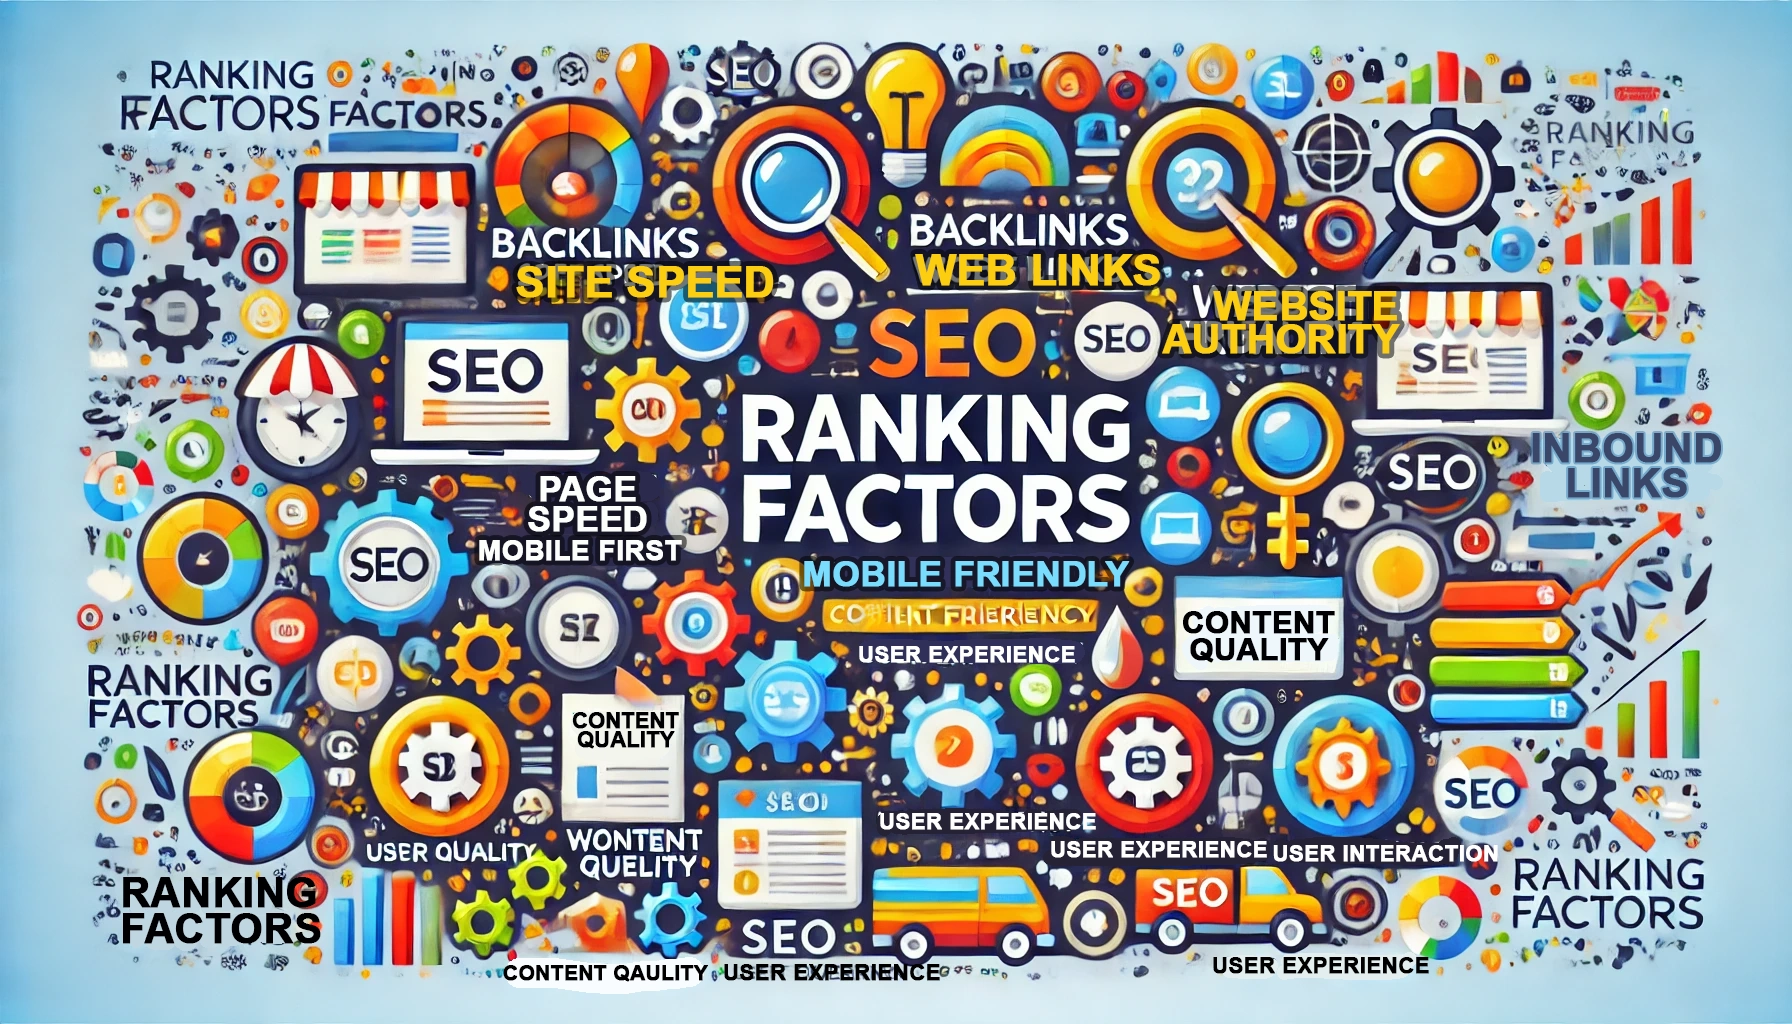 A Complete List of 200+ SEO Ranking Factors